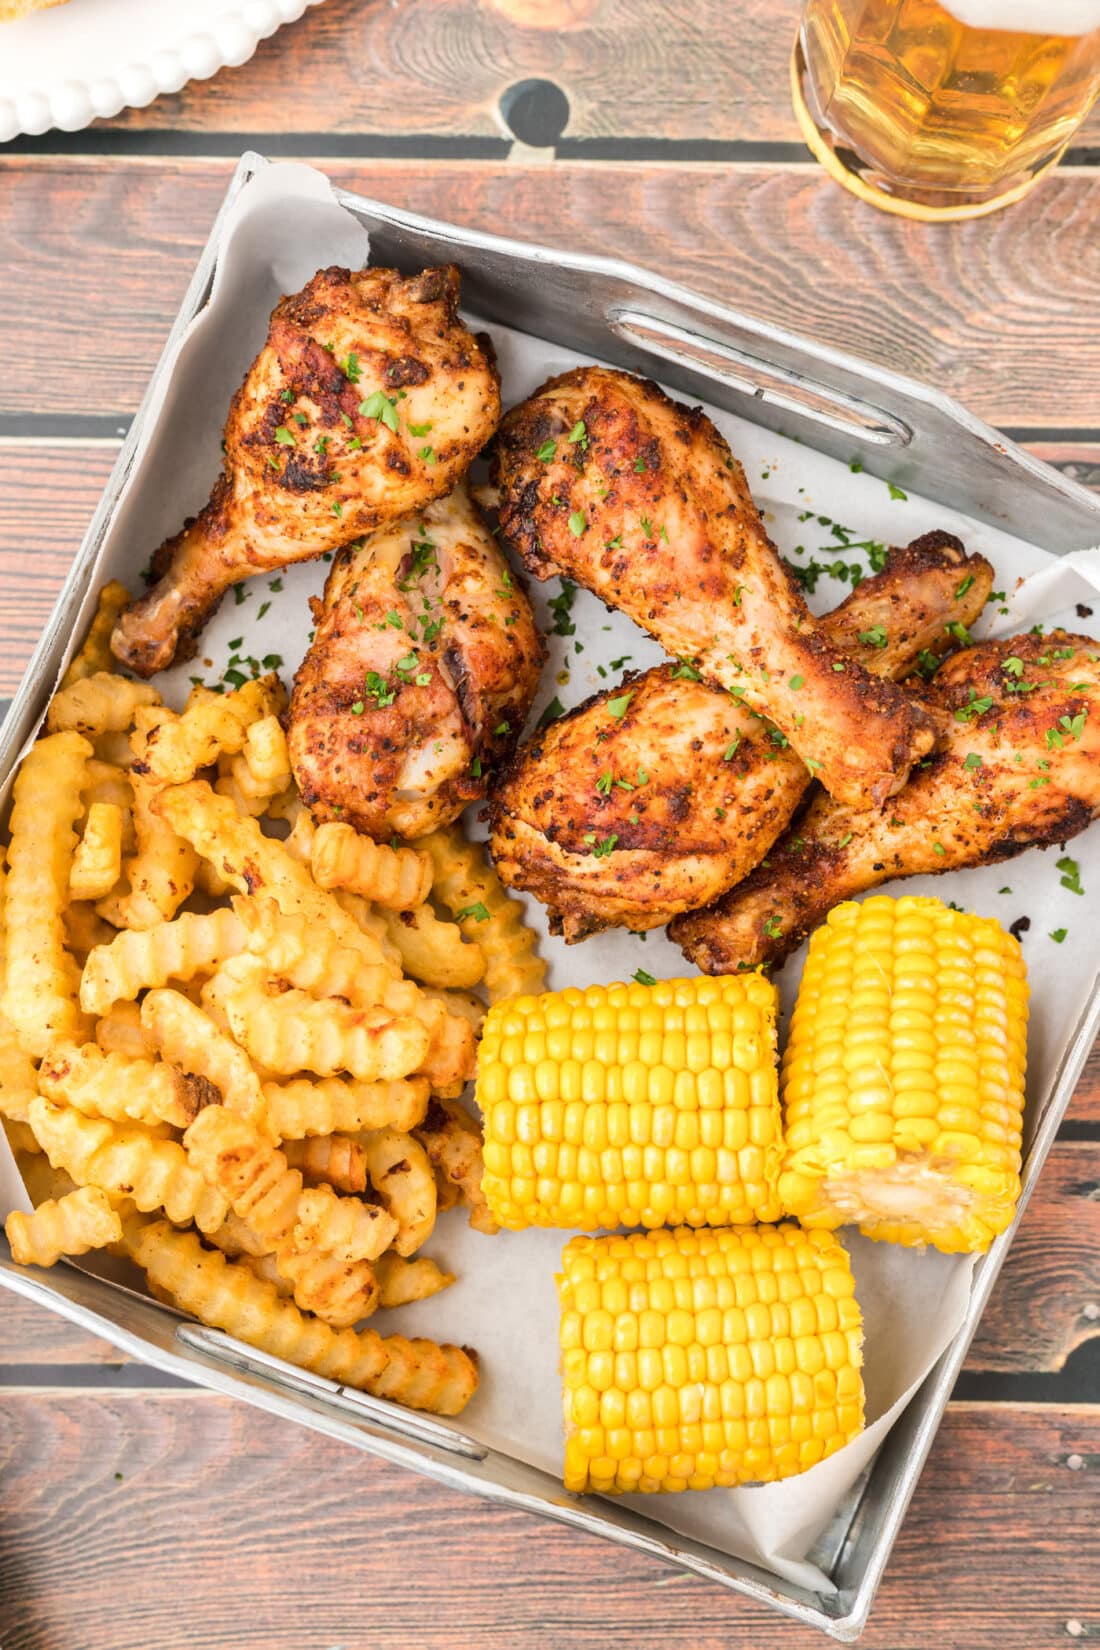 Baked Chicken Legs with fries and corn